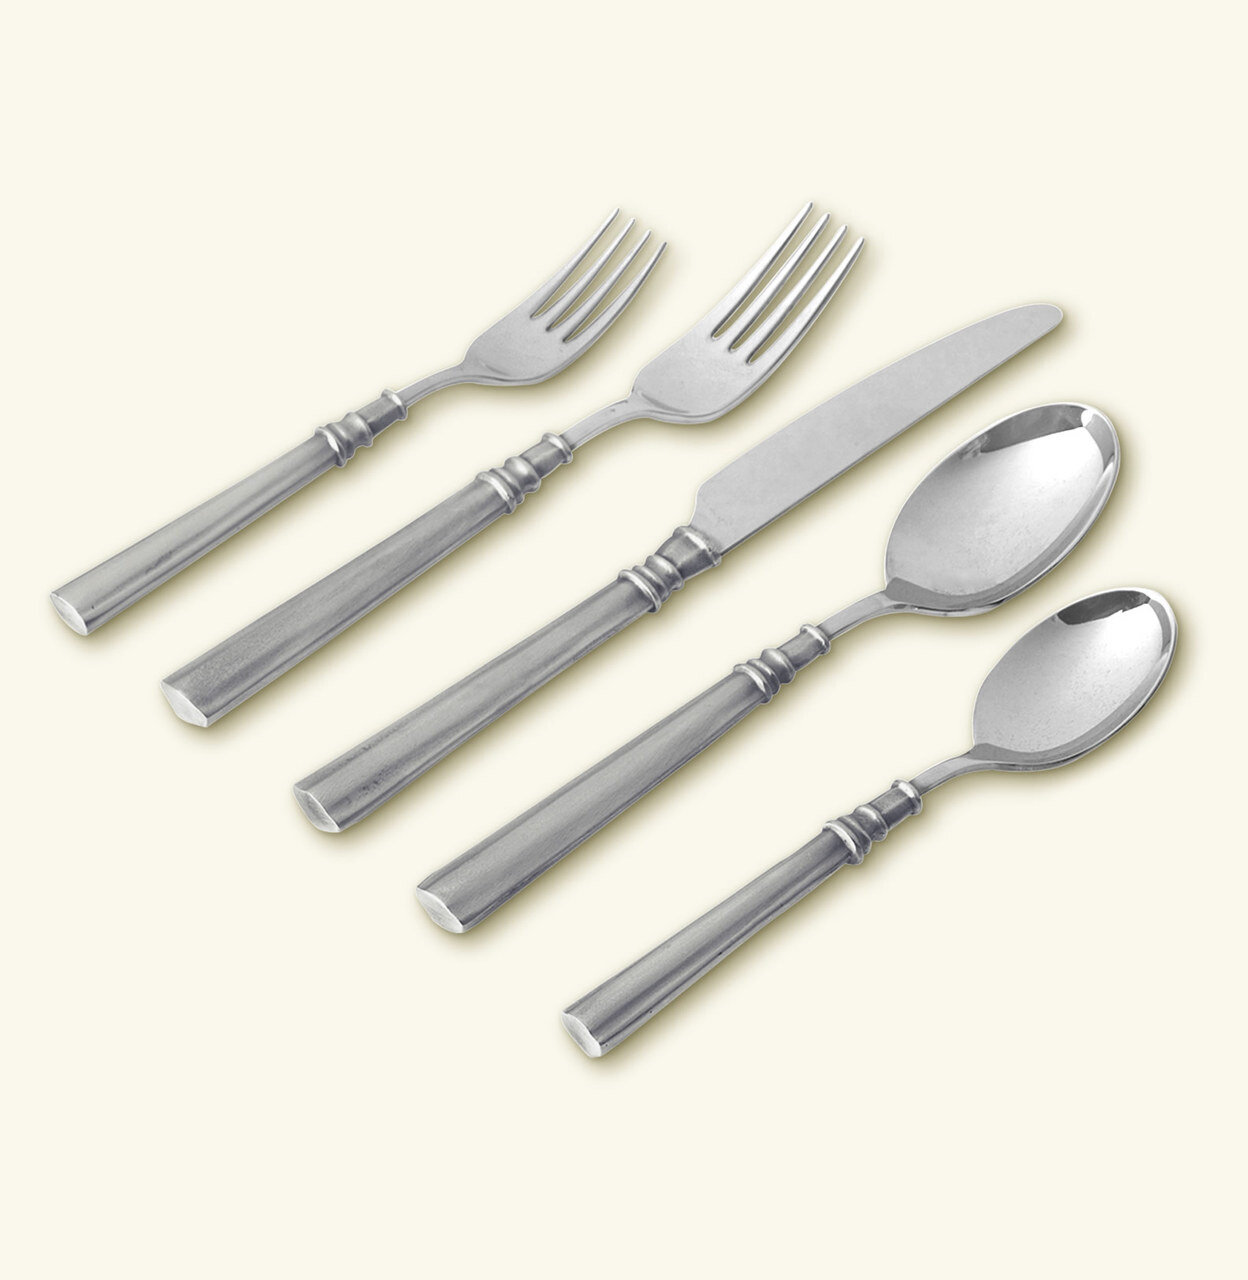 Match Pewter Lucia 5 Piece Place Setting With Forged Blade